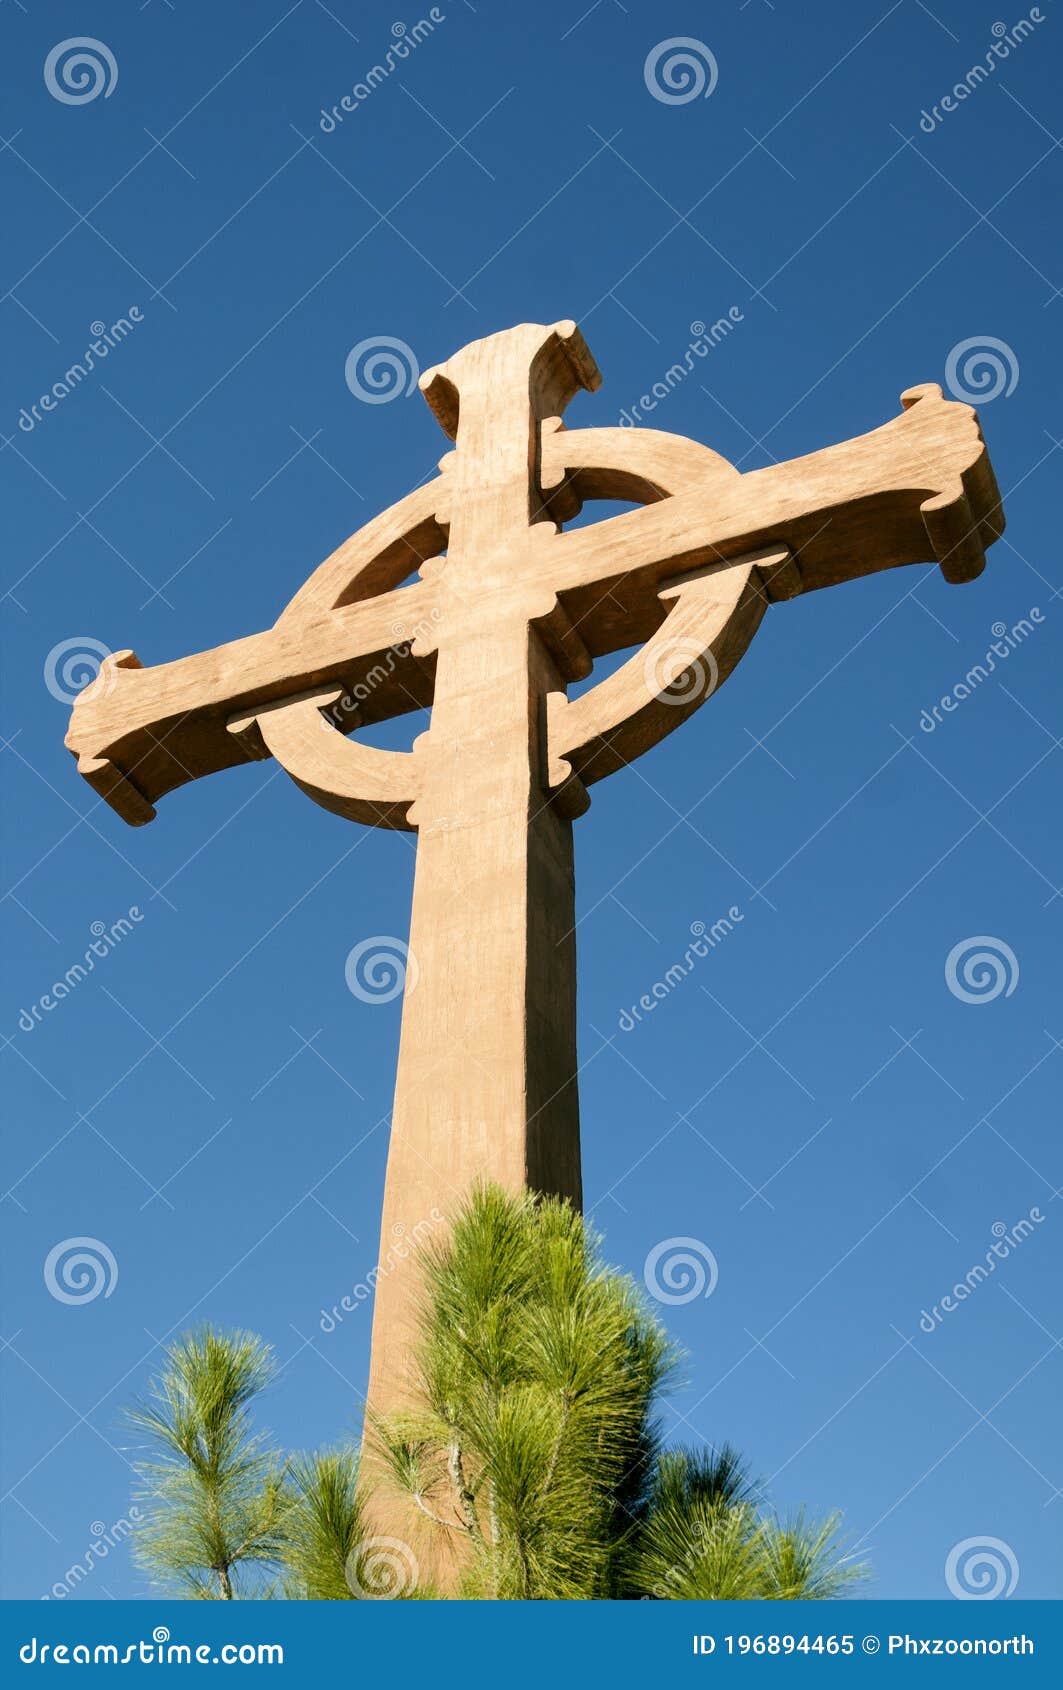 wood cross at monastery backed by blue sky